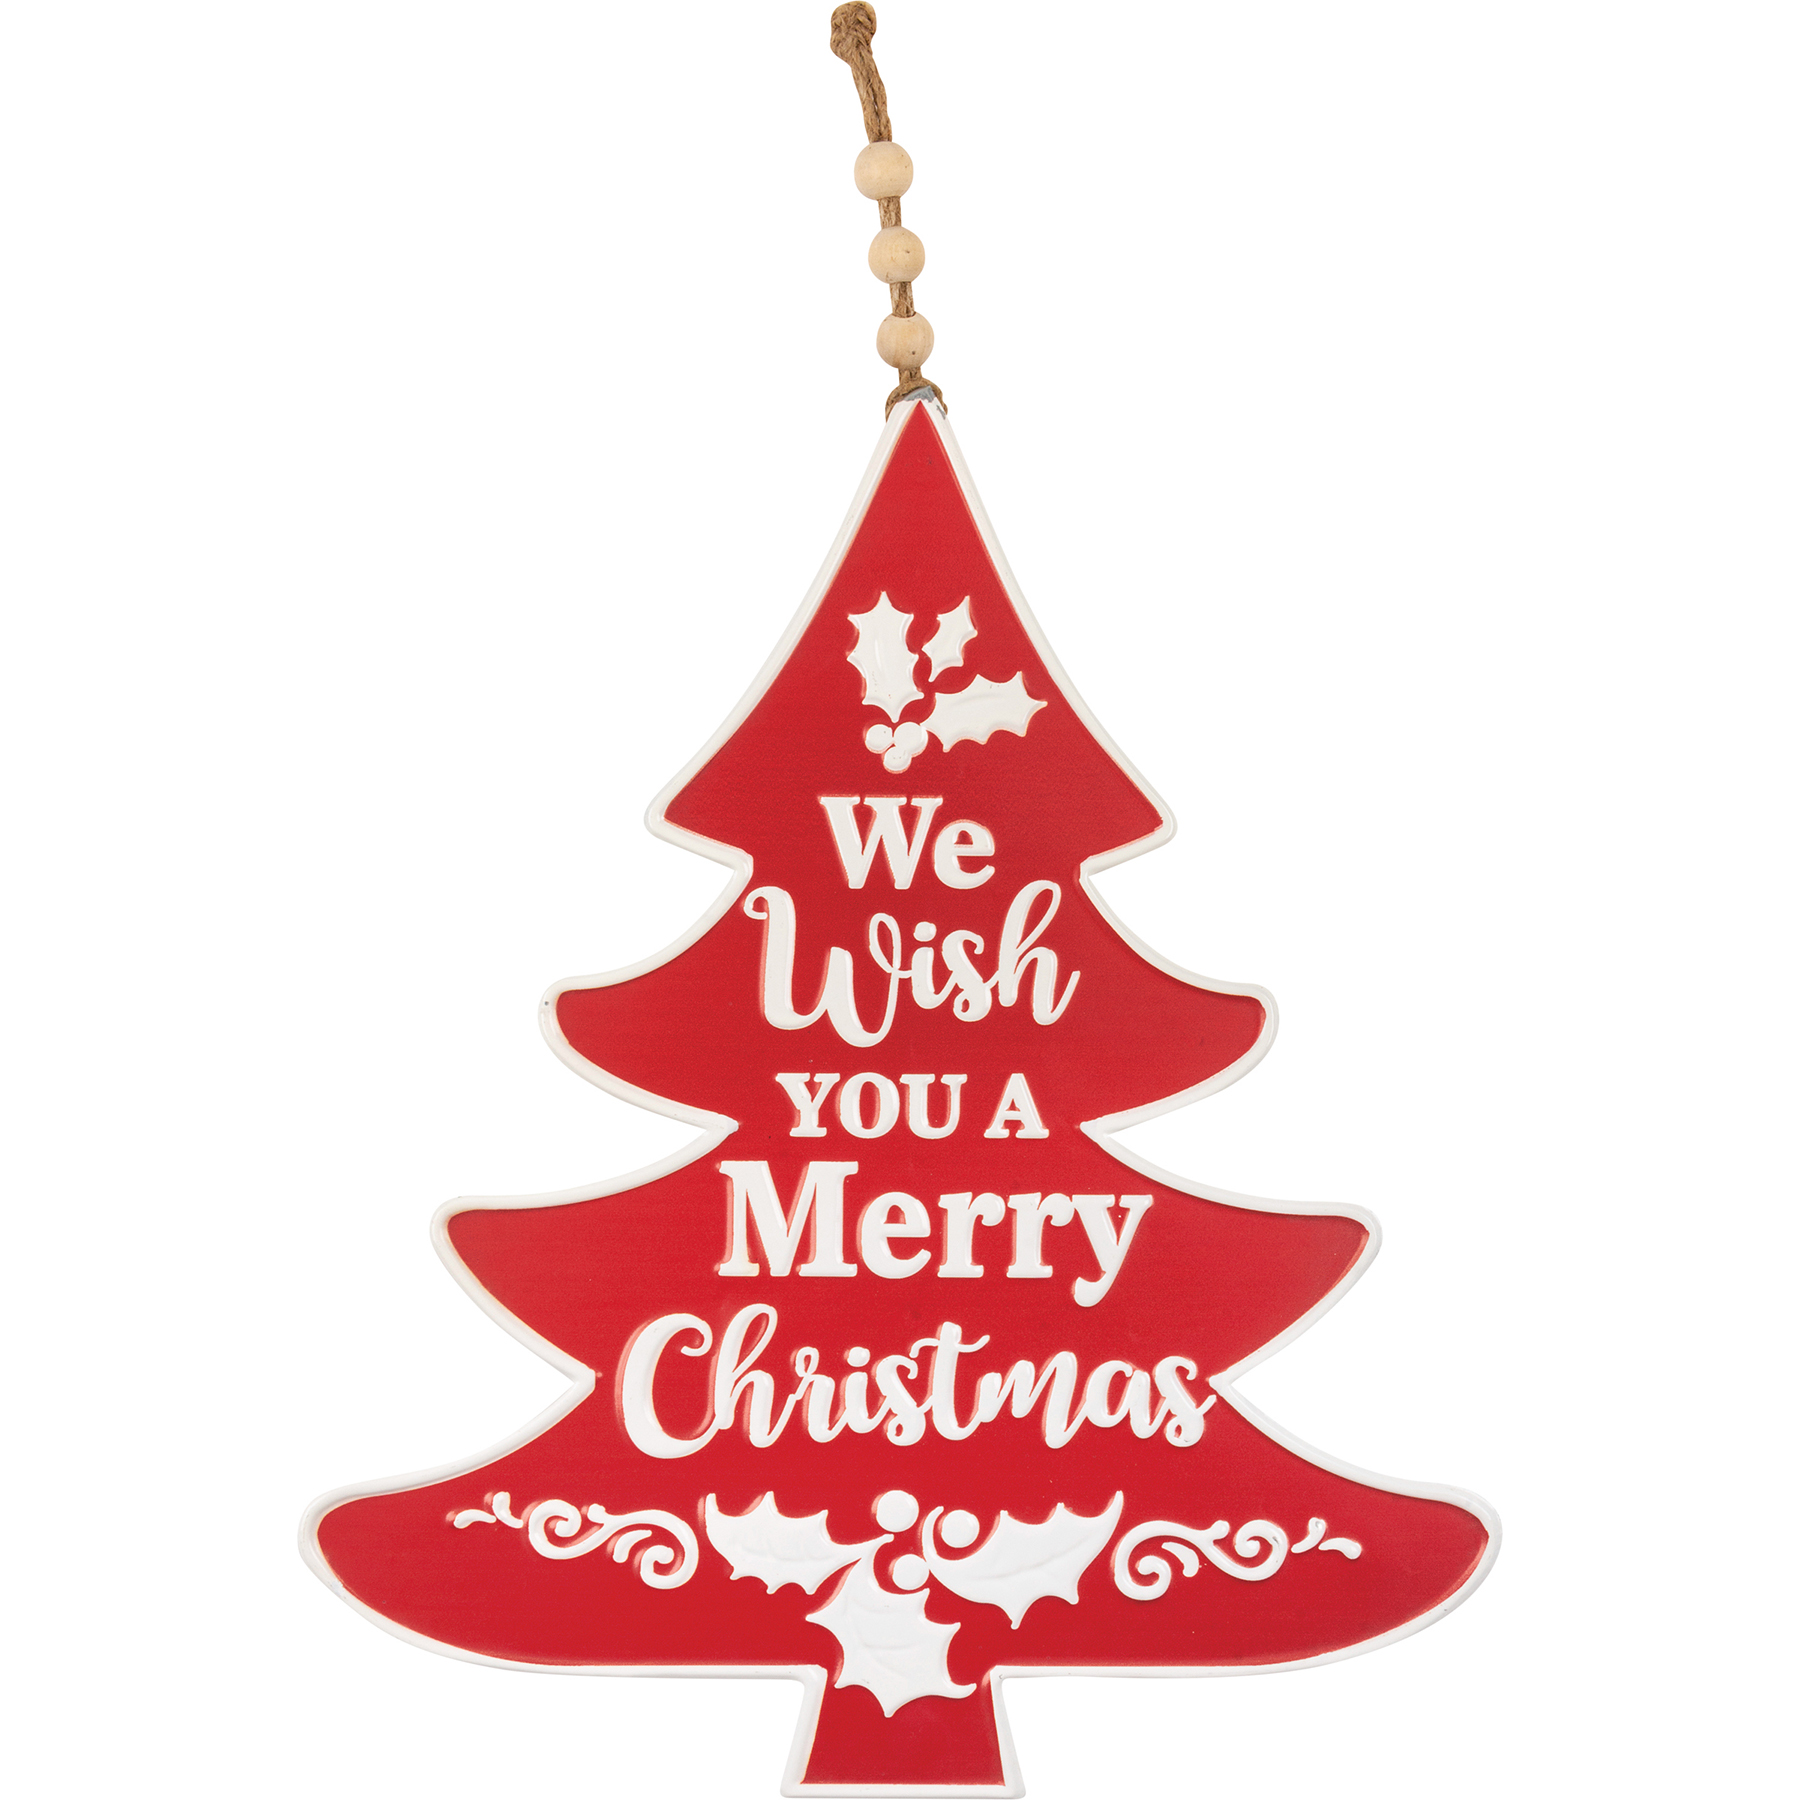 We Wish You A Merry Christmas Wall Decor | Primitives By Kathy